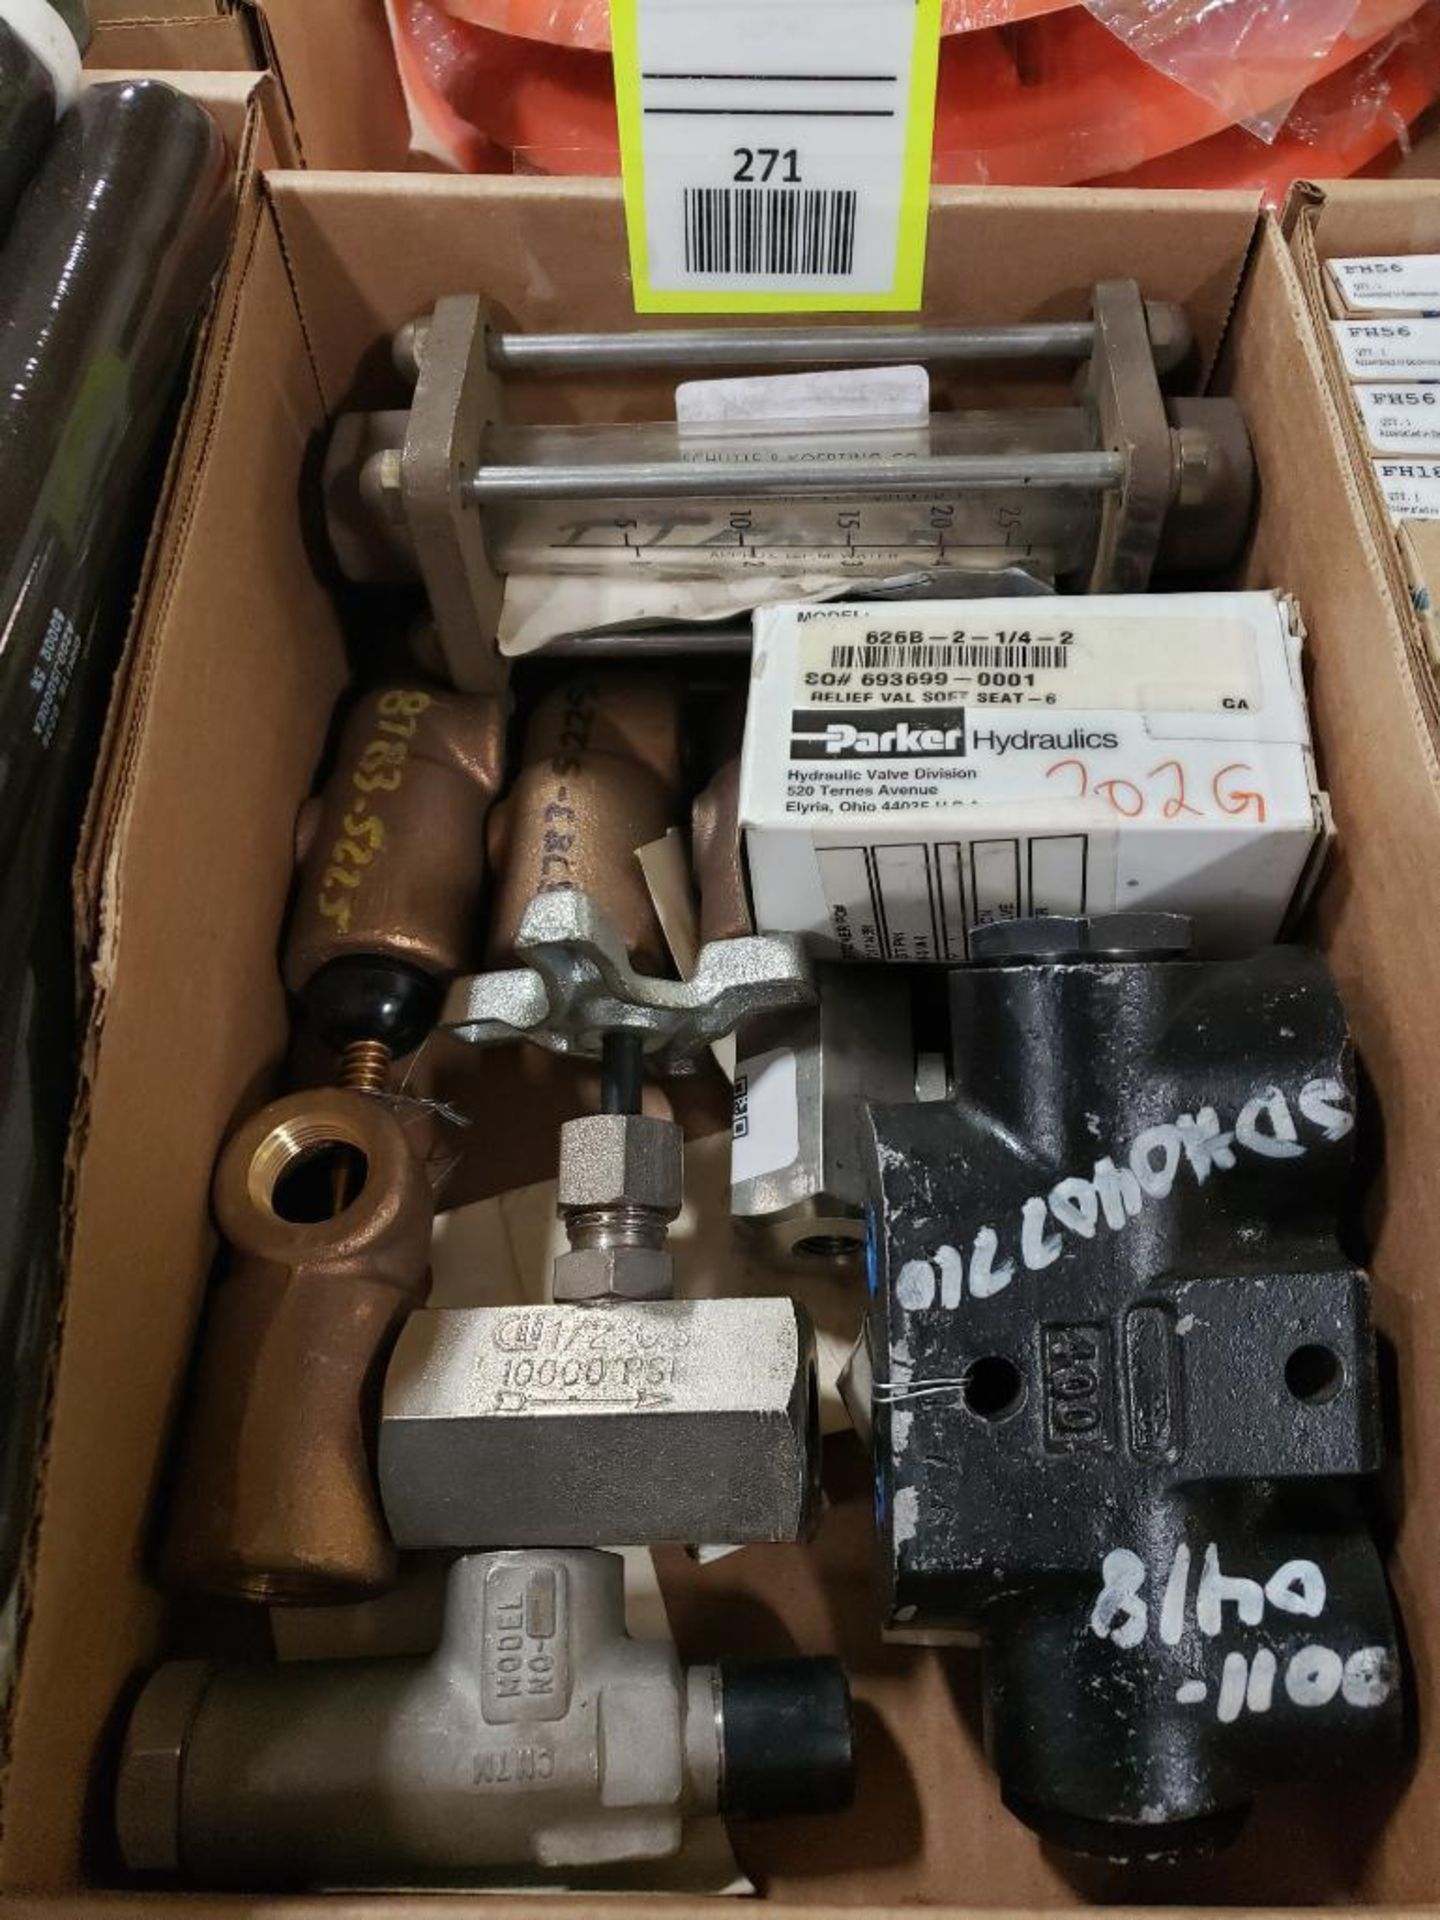 Lot of assorted hydraulic valves. Appear new as pictured. - Image 2 of 2